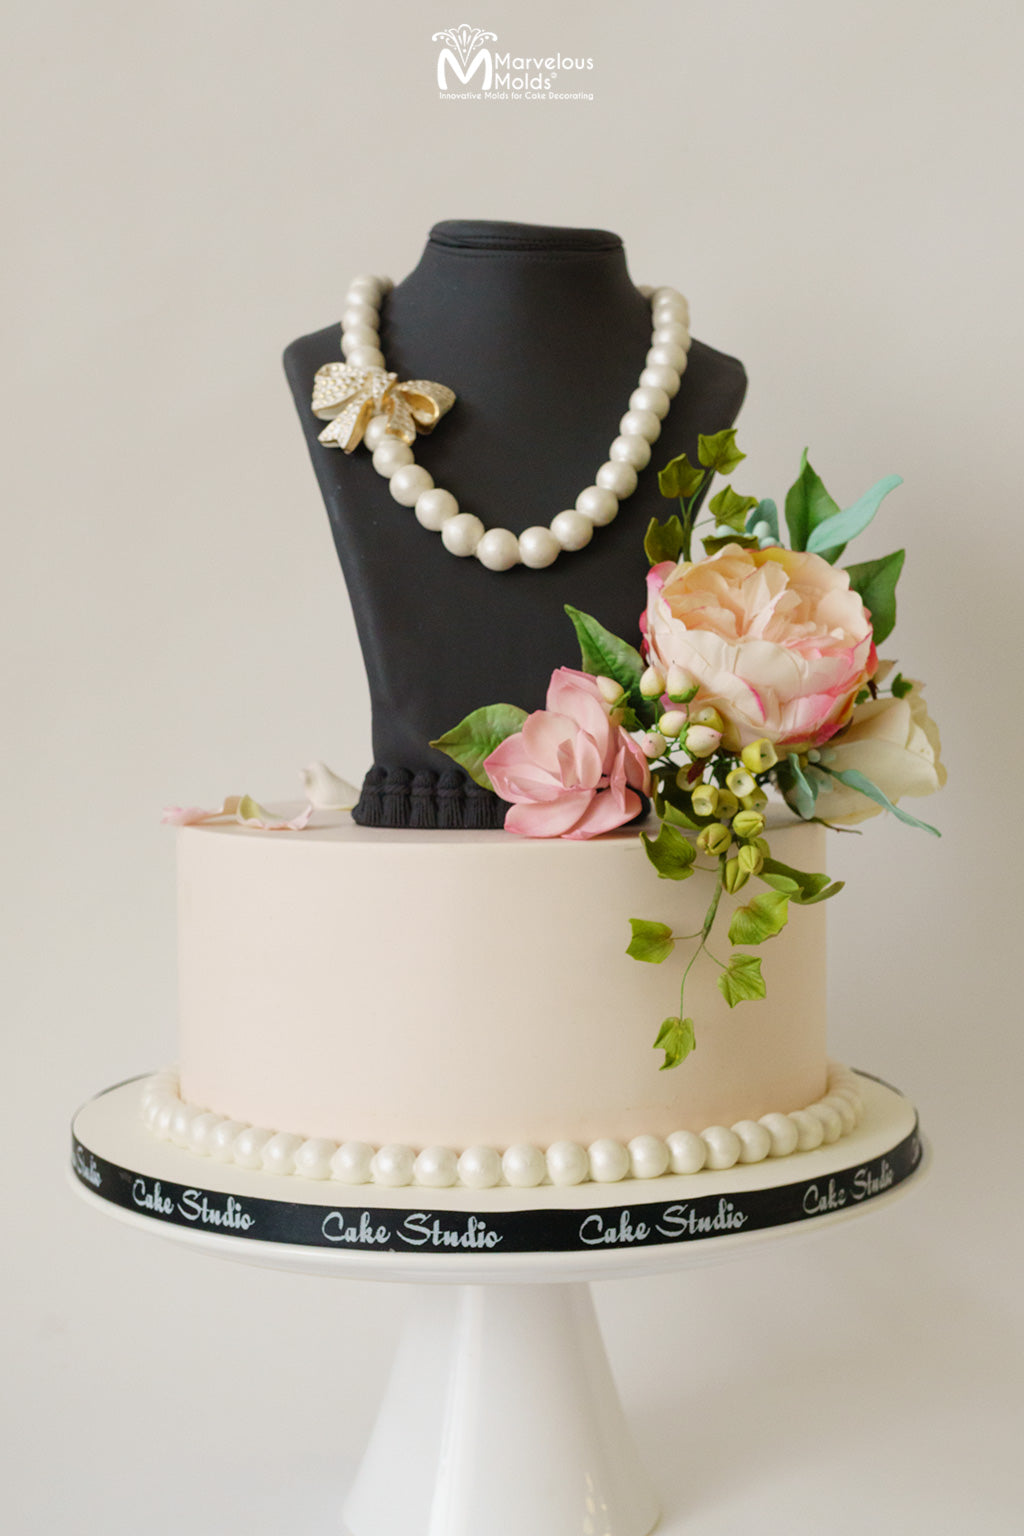 Fashionable, Edible Necklace Bust Display Sculpted with Cake and Decorated with Sugar Pearls, Created with the PinchPro Pearls 14mm Silicone Mold